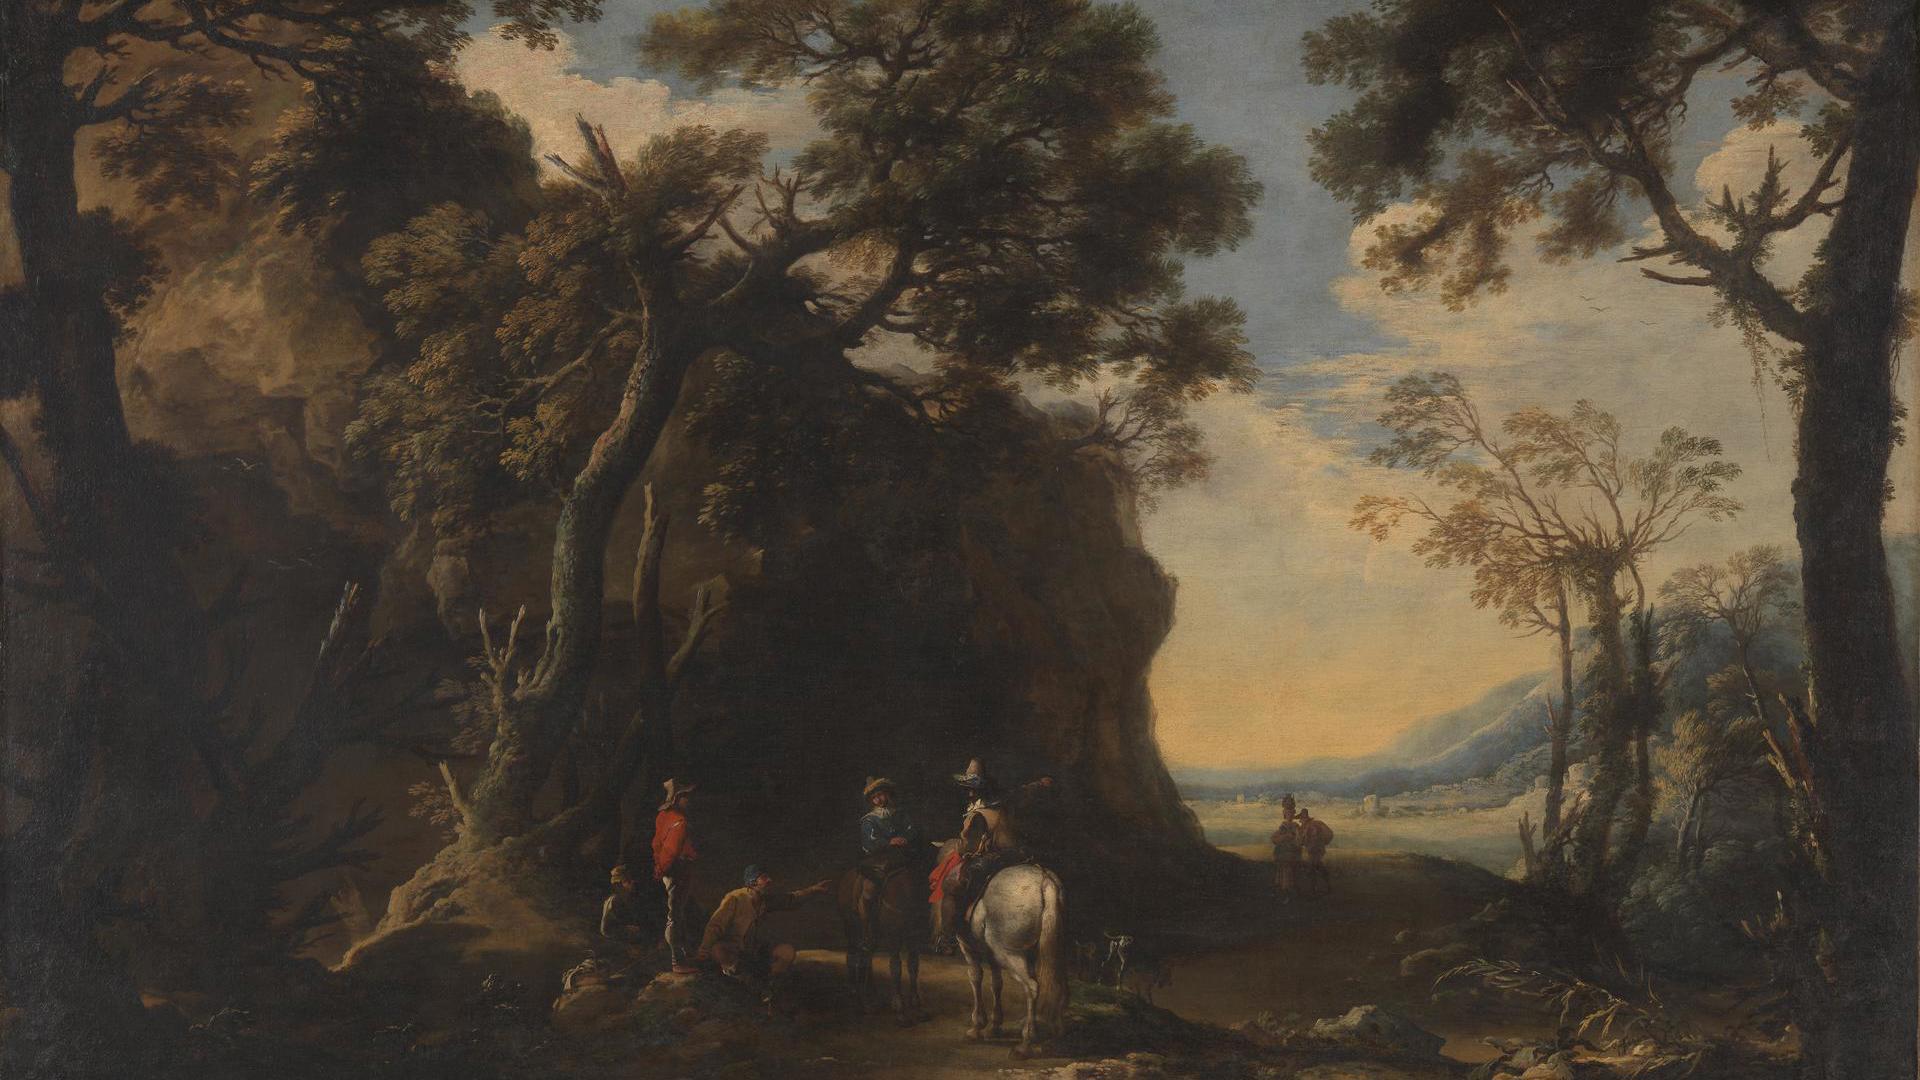 Landscape with Travellers asking the Way by Salvator Rosa